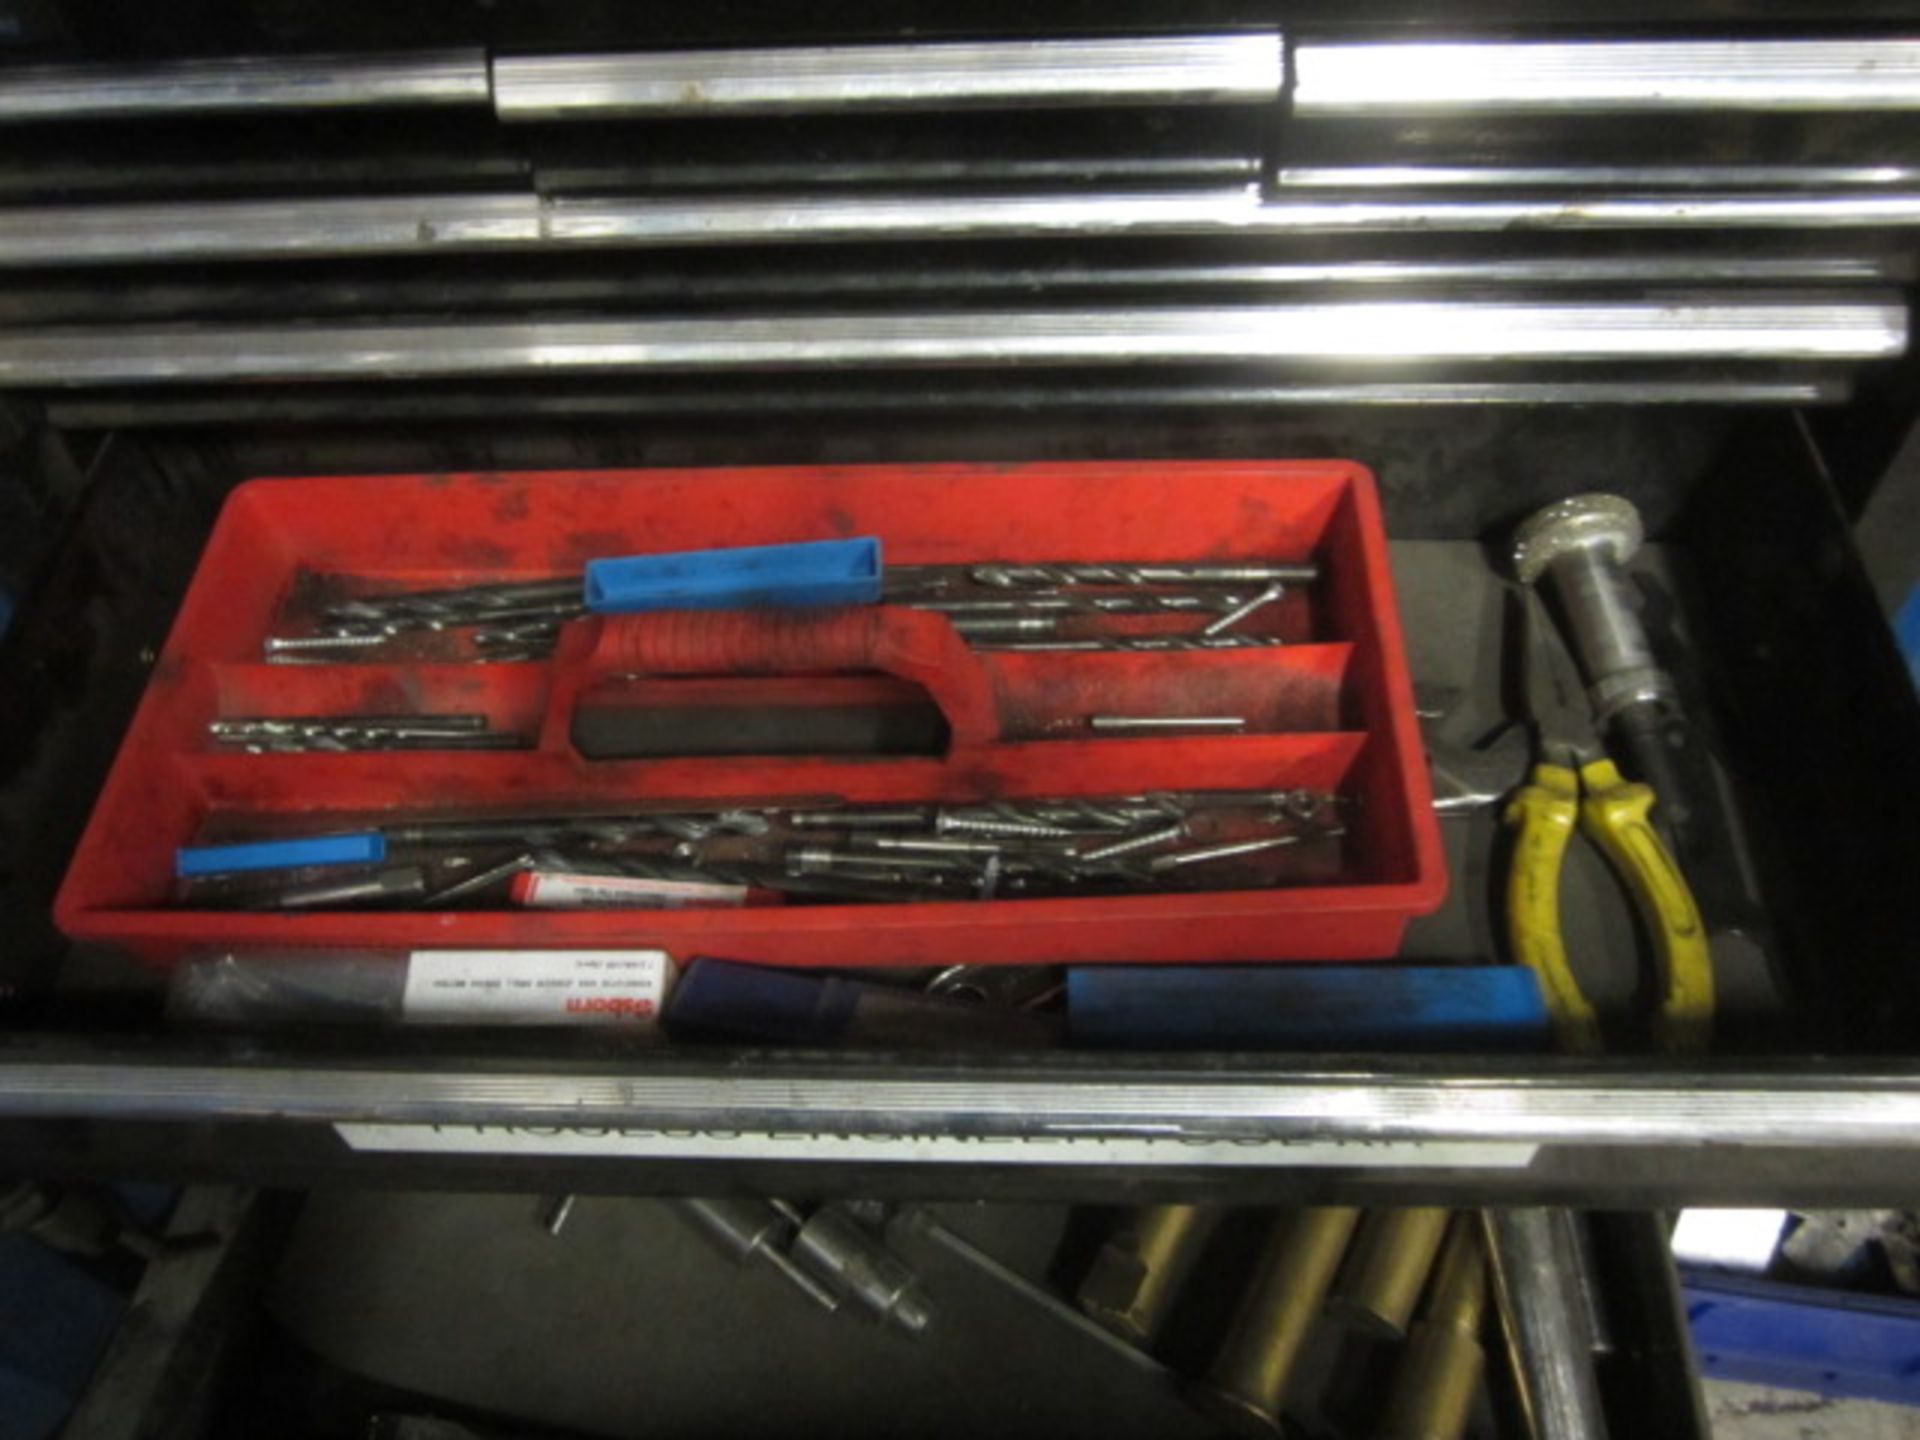 SGS mobile multidrawer tool box with contents incl. files, drill bits, mallet, hammers, screwdrivers - Image 4 of 9